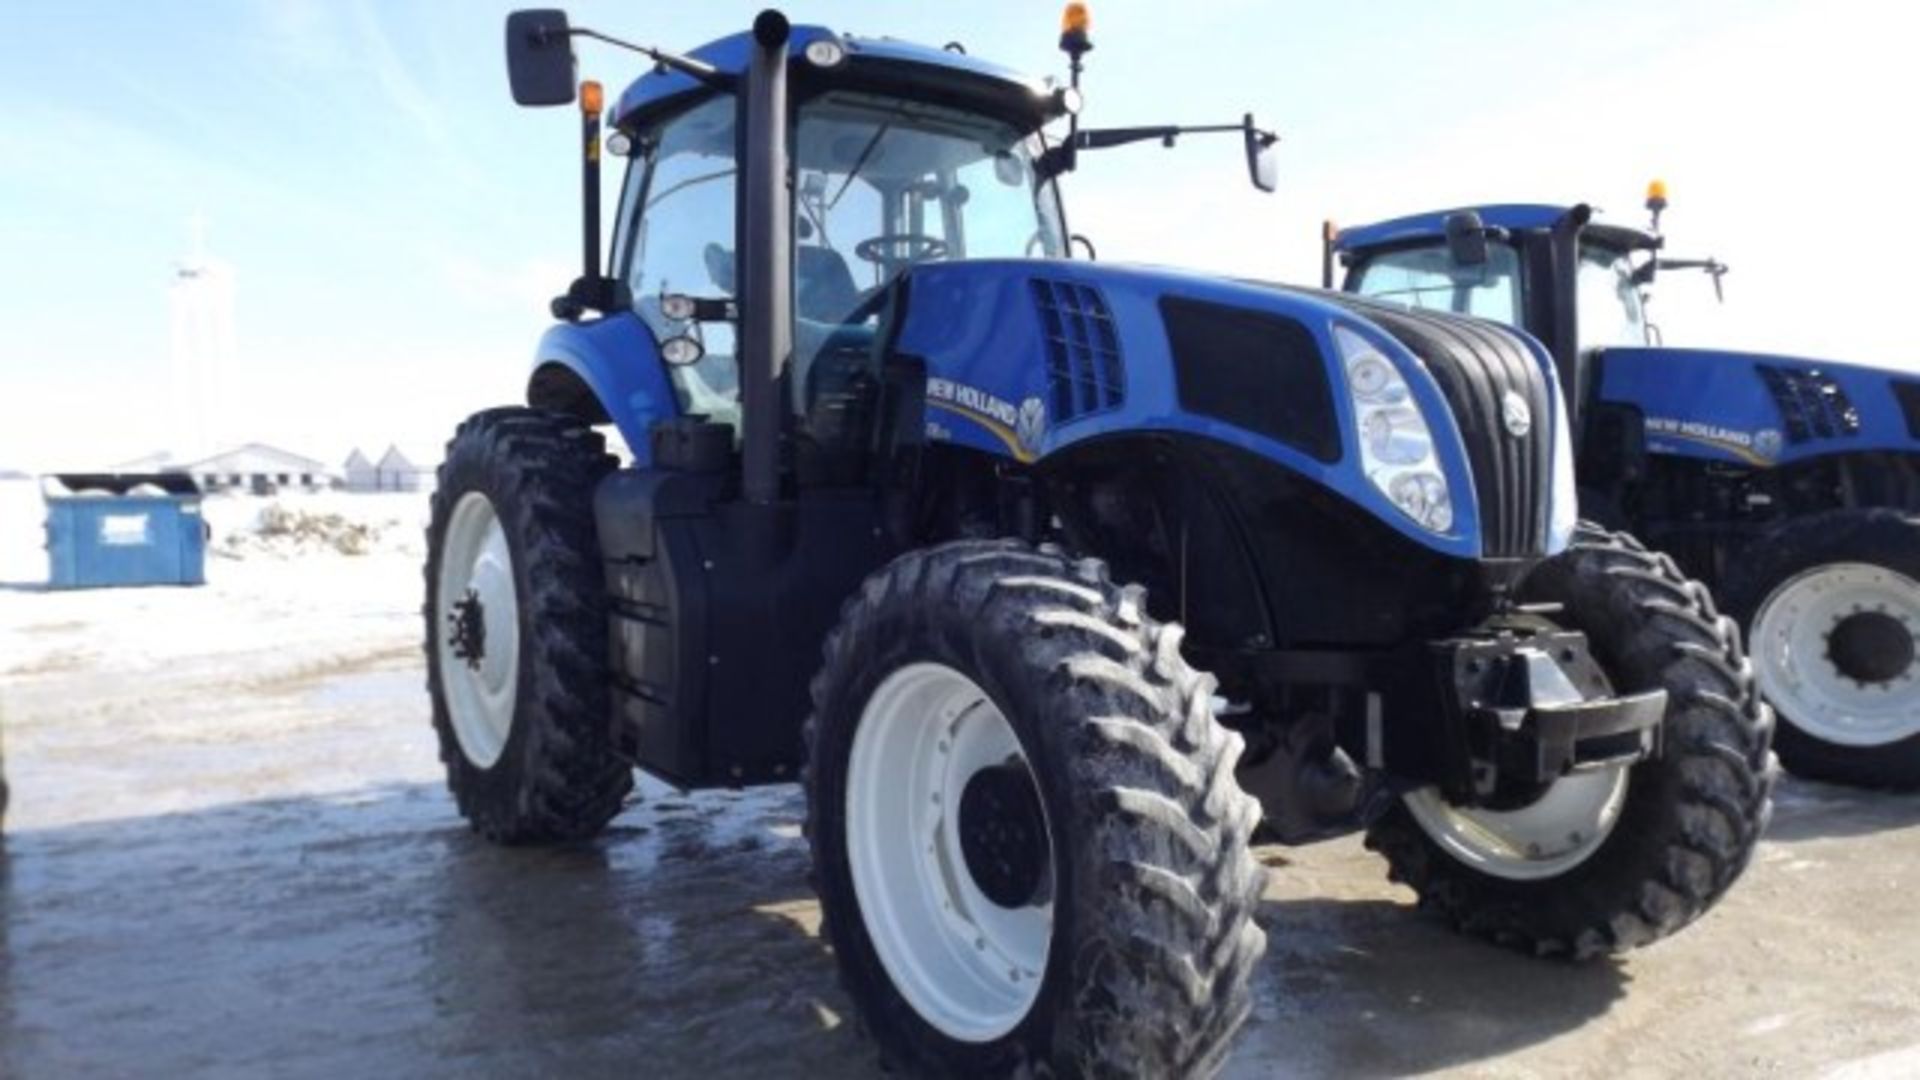 New Holland T8.275 Tractor '12, sn#ZCRC05266 4448 Hrs, MFWD, Deluxe Cab, Buddy Seat, 235 HP, 18/4 - Image 2 of 17